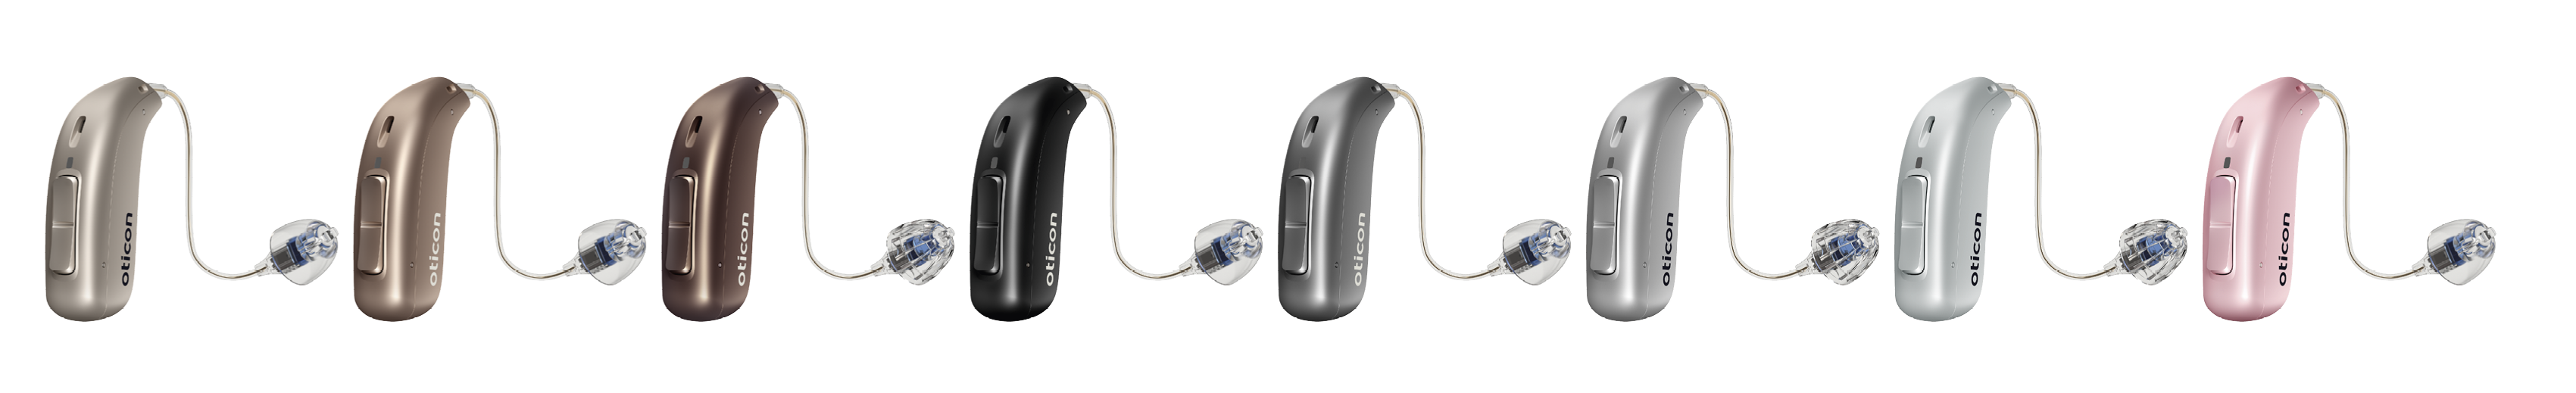 Oticon More hearing aids, the hearing solution